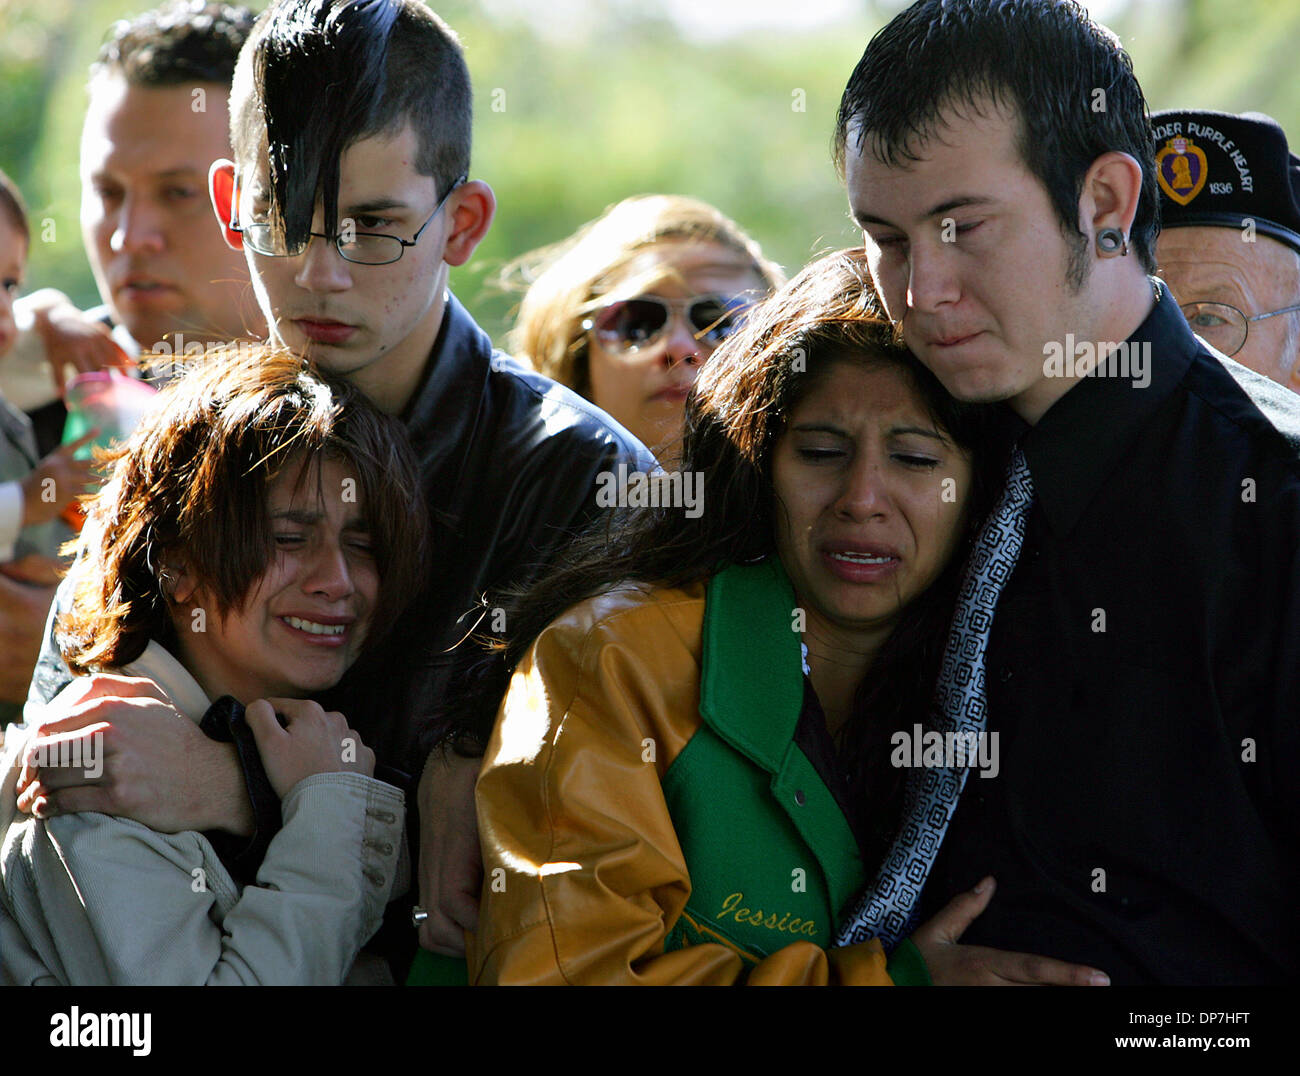 Nov 15, 2006; San Antonio, TX, USA; Lauren Morales, Steven Ruiz, Jessica Alkaabi and Augustine Gonzalez - all former Holmes High School classmates of Jose Galvan - attent the graveside service for Marine Cpl. Jose Galvan Tuesday, November 15, 2006 at Fort Sam Houston National Cemetary. Galvan was killed in the Anbar Province in Iraq. Mandatory Credit: Photo by Bahram Mark Sobhani/S Stock Photo